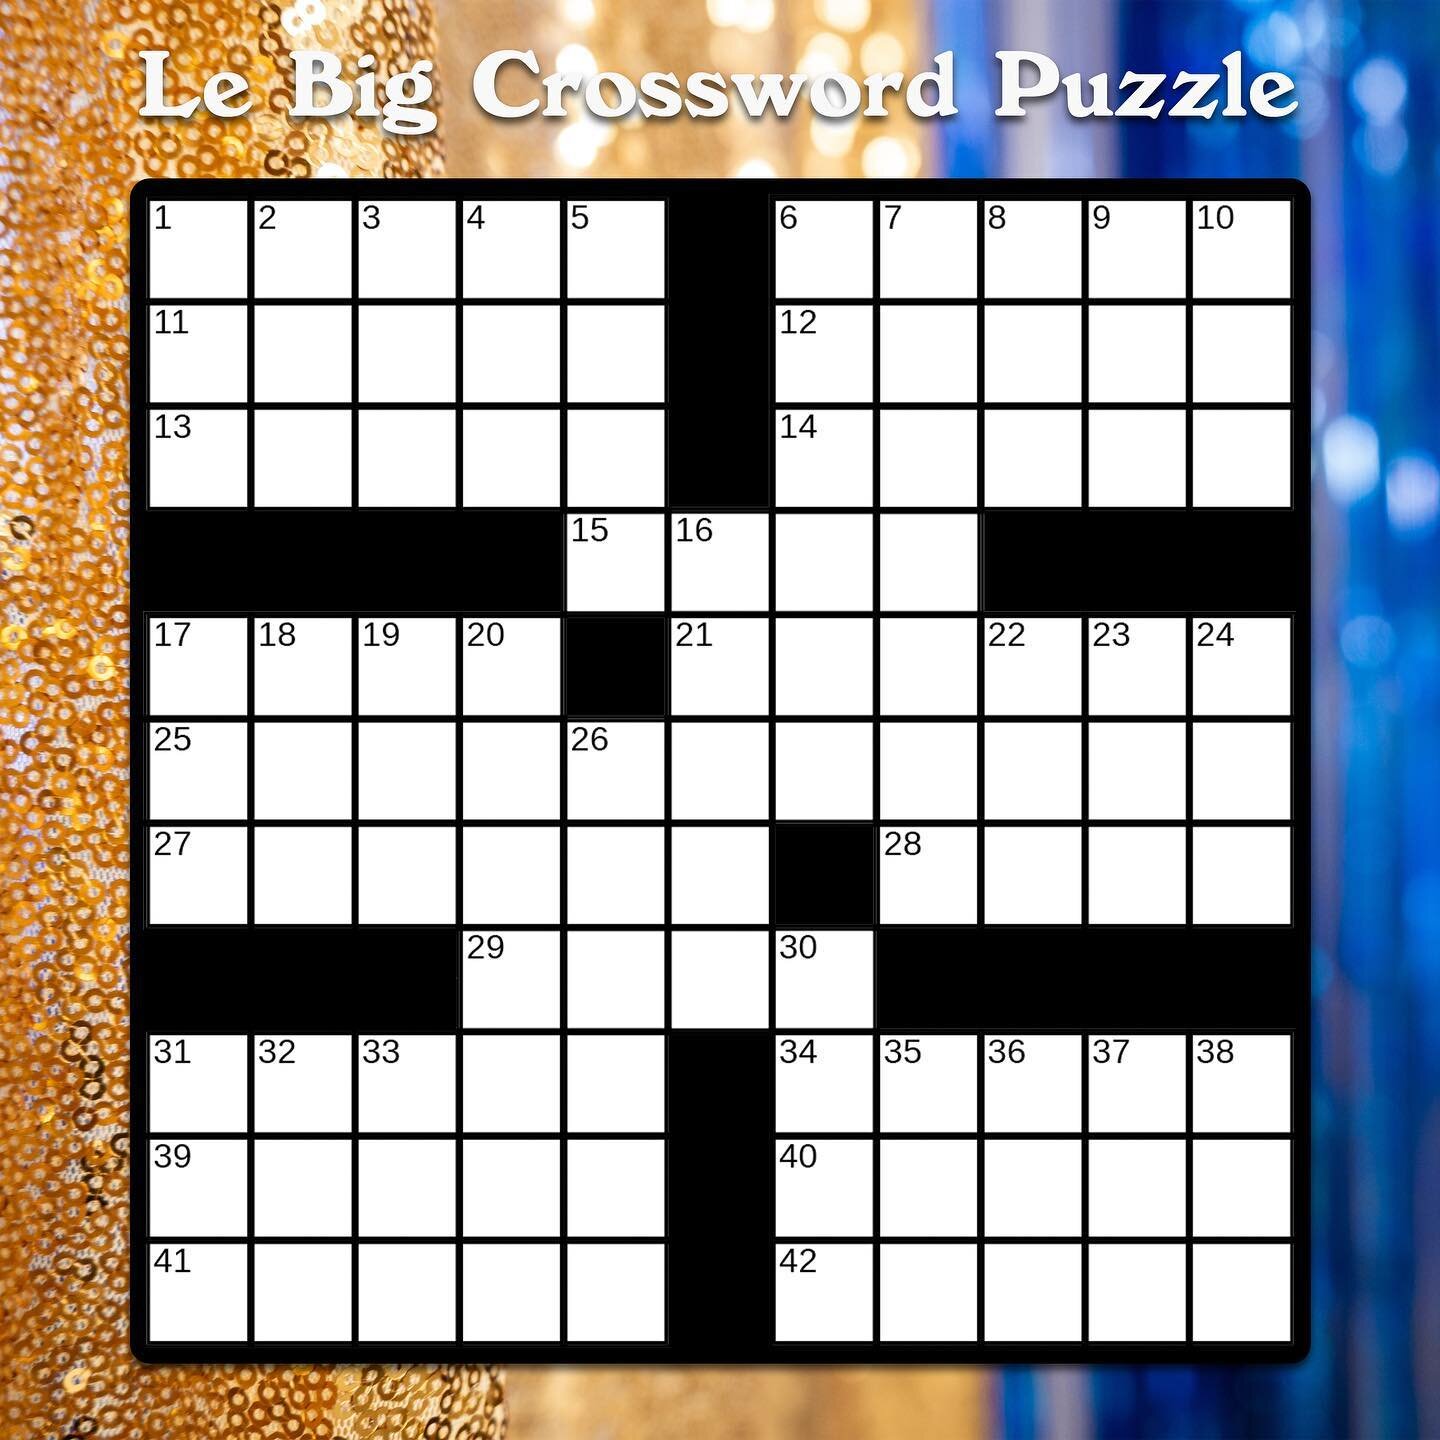 Where my crossword nerds at? How does a free tote bag sound 😍 First three people to correctly solve this puzzle will win one! Make sure to stream @lebigzero&rsquo;s new song &ldquo;Beach Seance&rdquo; wherever you get your music &amp; pre-order &lsq